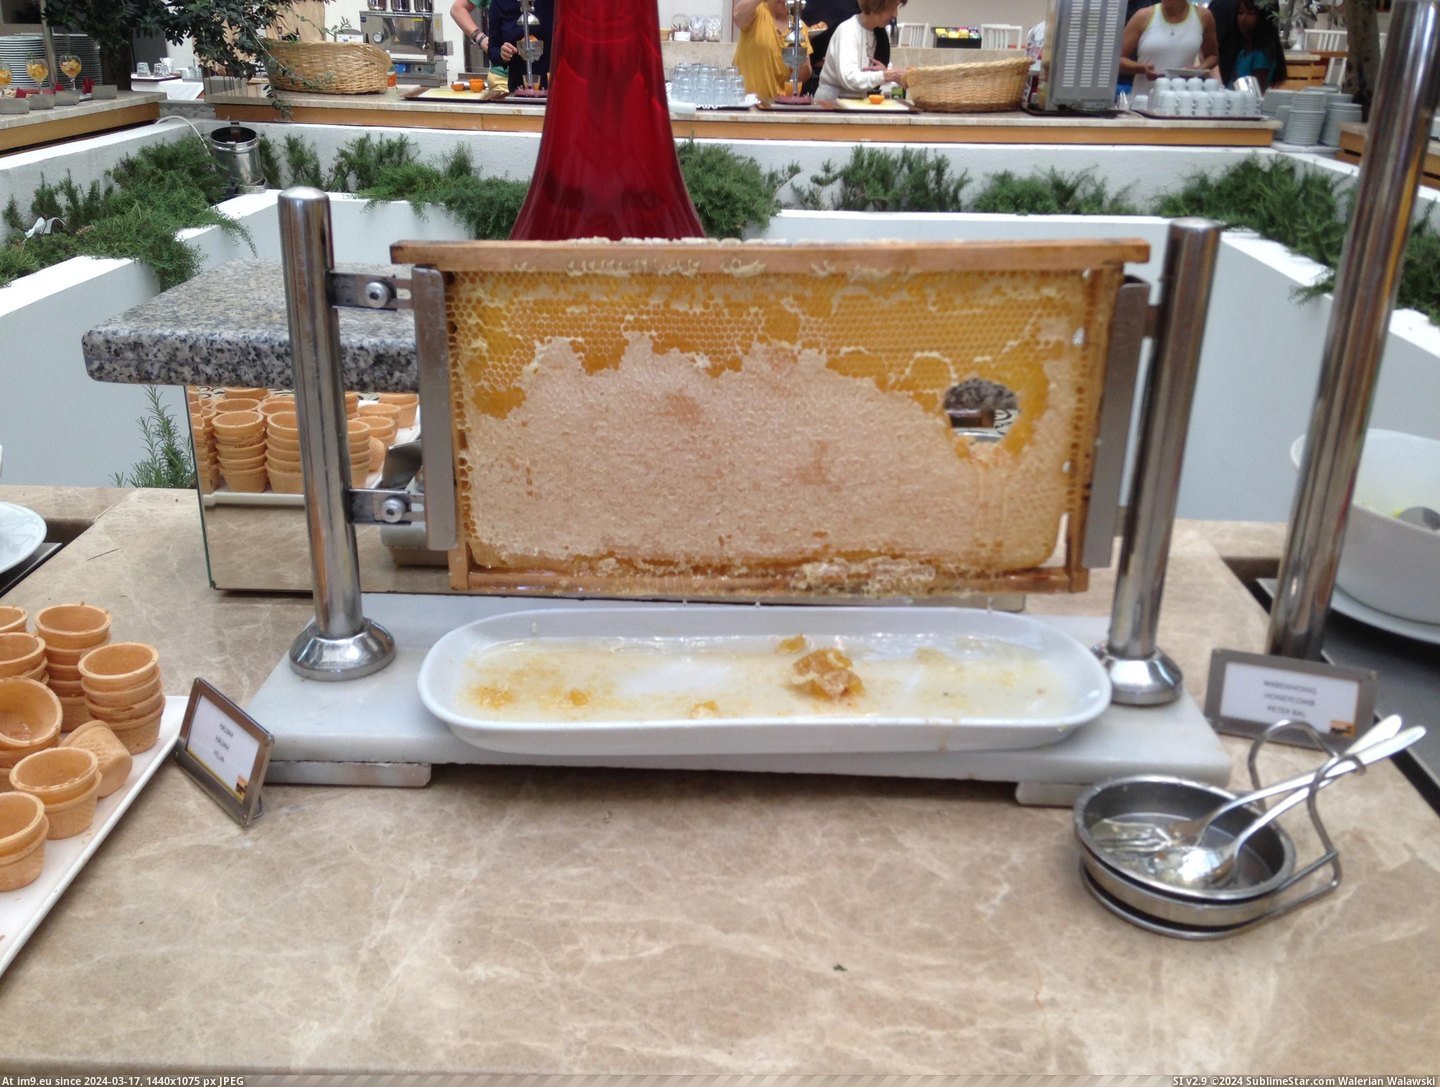 #Hotel #Honey #Honeycomb #Served [Mildlyinteresting] In my hotel the honey is served directly from the honeycomb Pic. (Image of album My r/MILDLYINTERESTING favs))